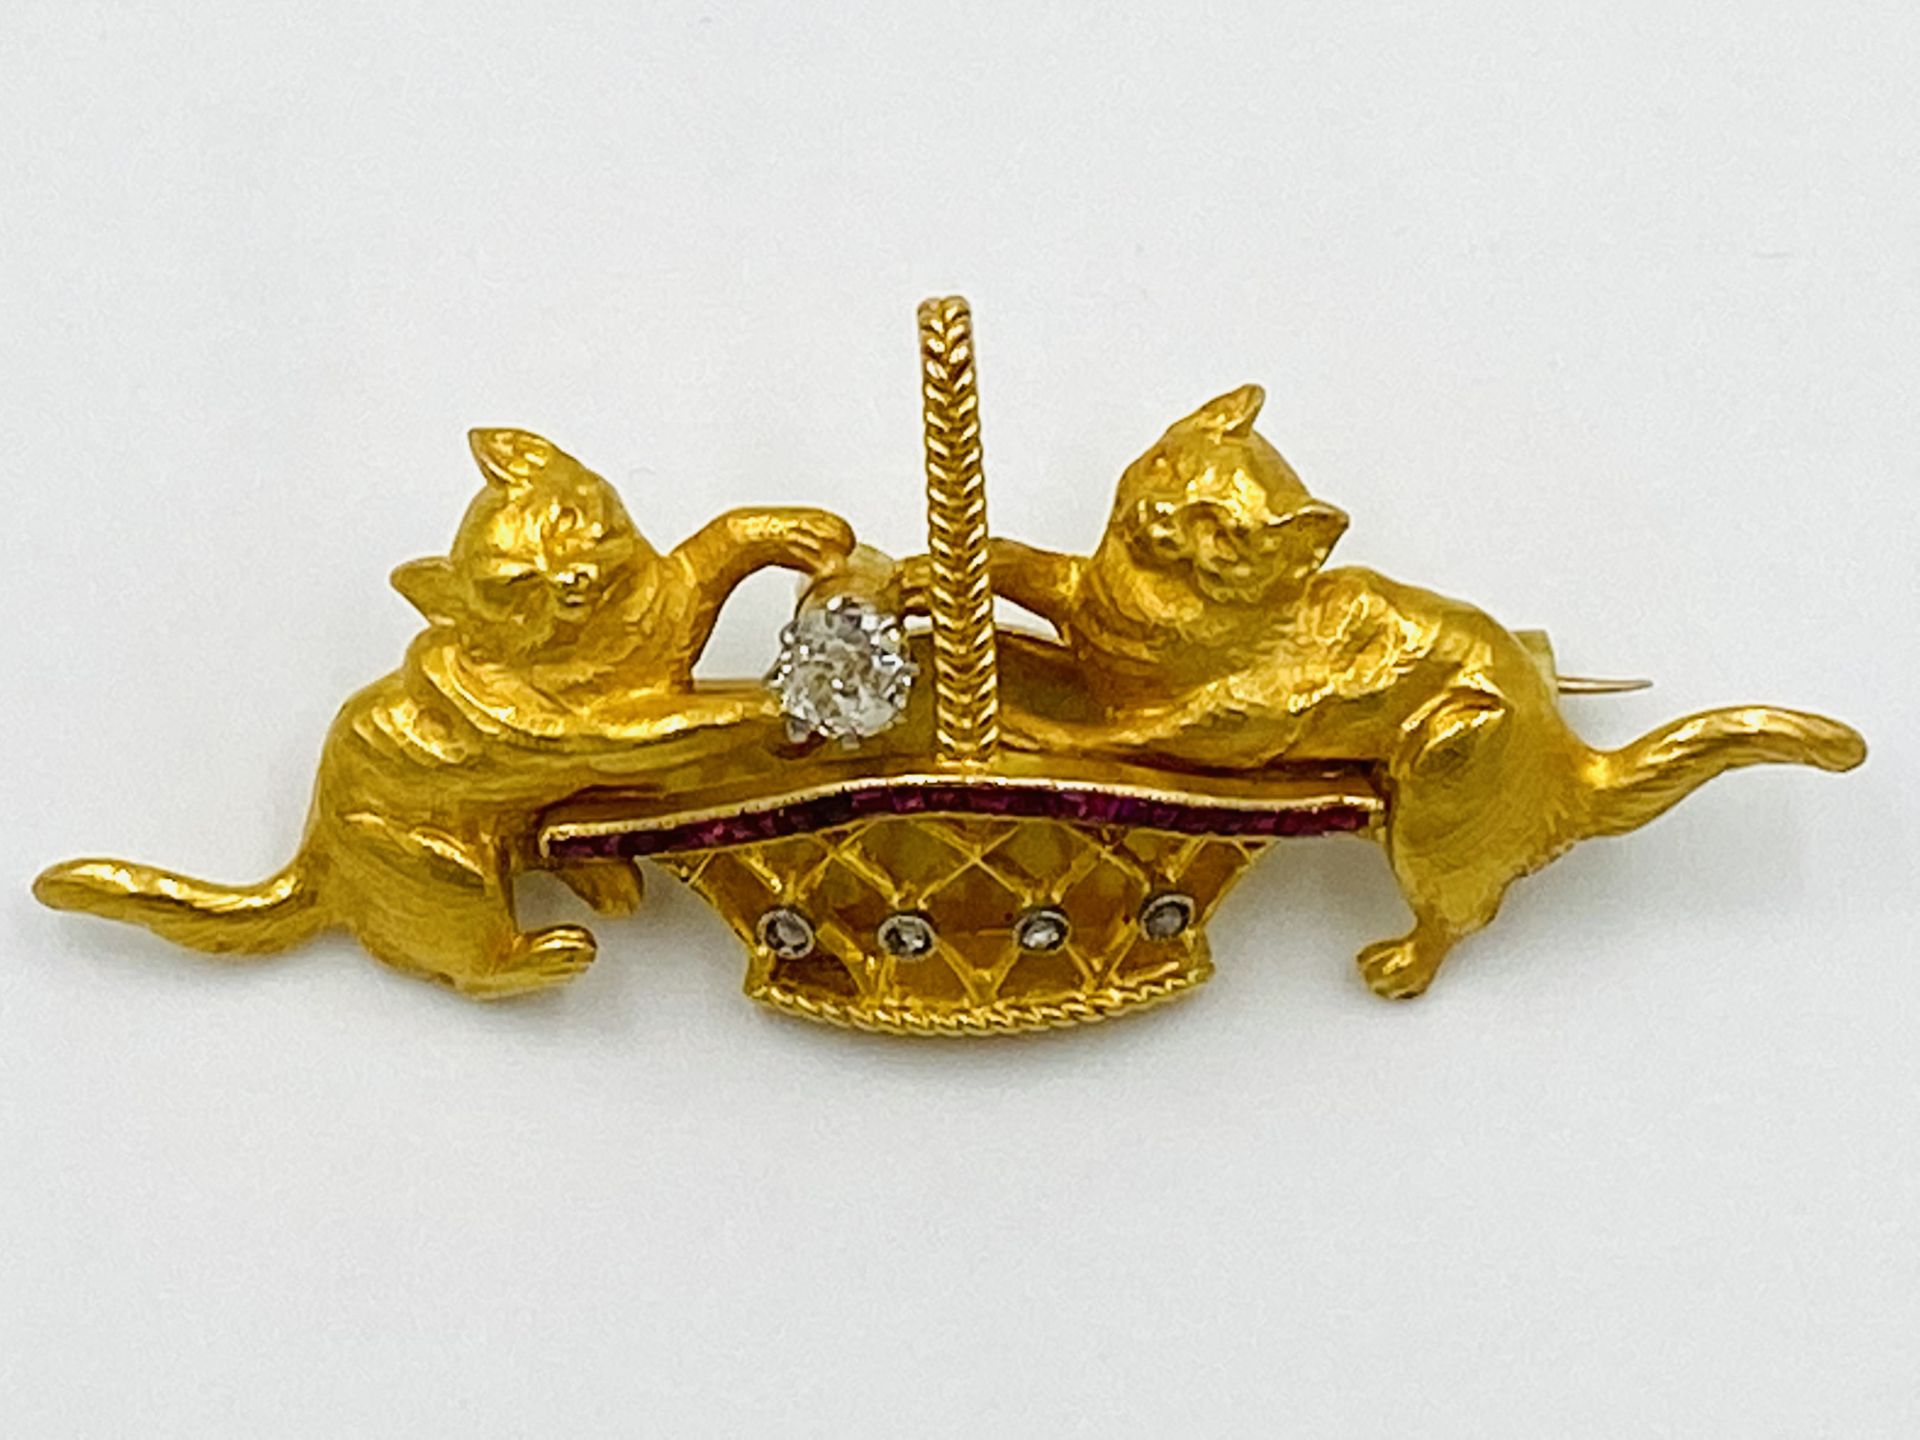 18ct gold brooch set with rubies and a diamond - Image 5 of 5